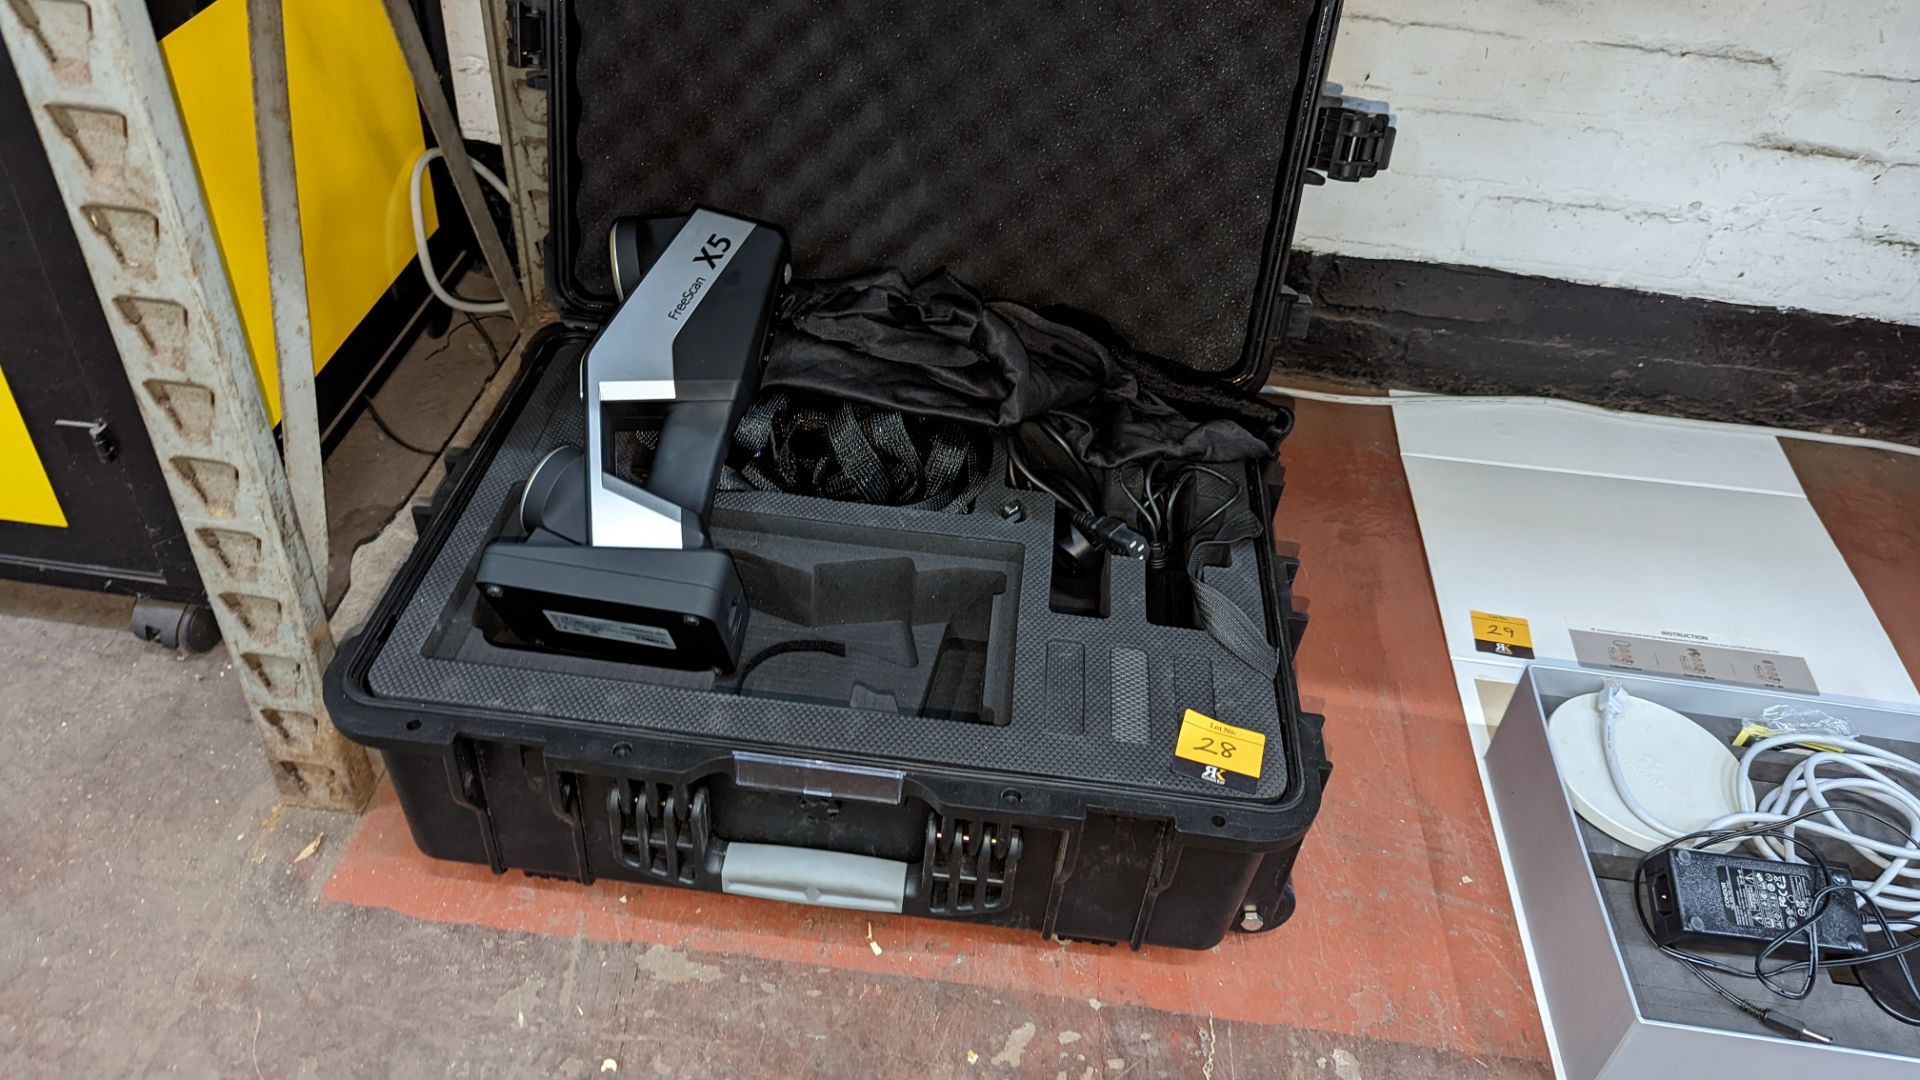 FreeScan X5 3D scanner including carry case & ancillaries - Image 11 of 12